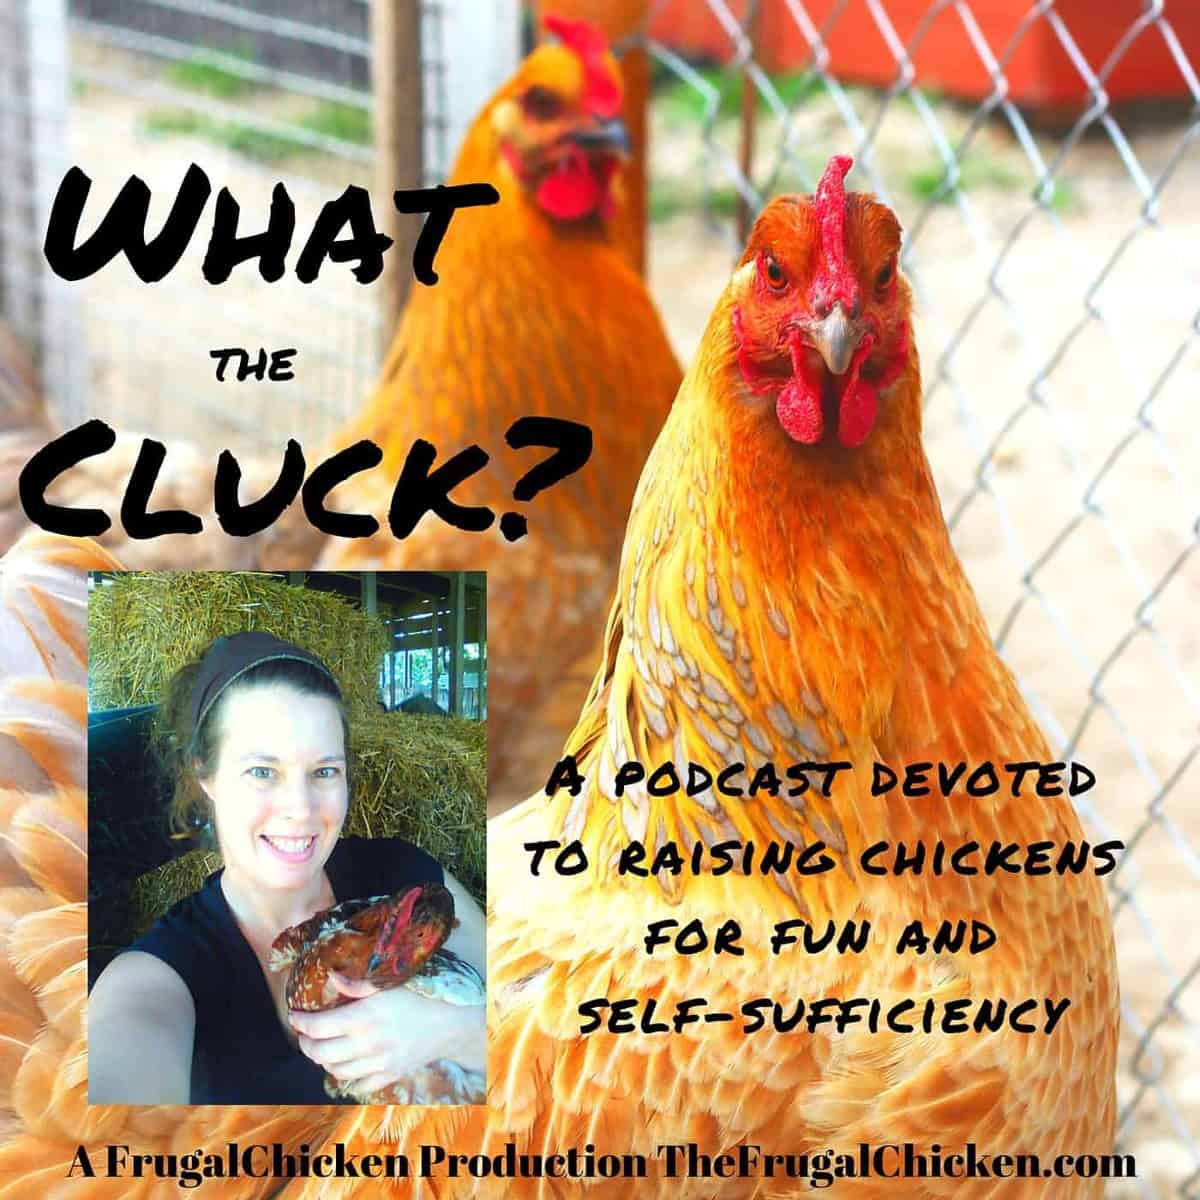 Rare breeds of chickens can have certain advantages over common breeds. In this episode of What The Cluck?! you'll learn about 4 rare breeds of chickens, the one breed that can bring substantial income to your farm, and common mistakes owners make raising rare breeds. From FrugalChicken